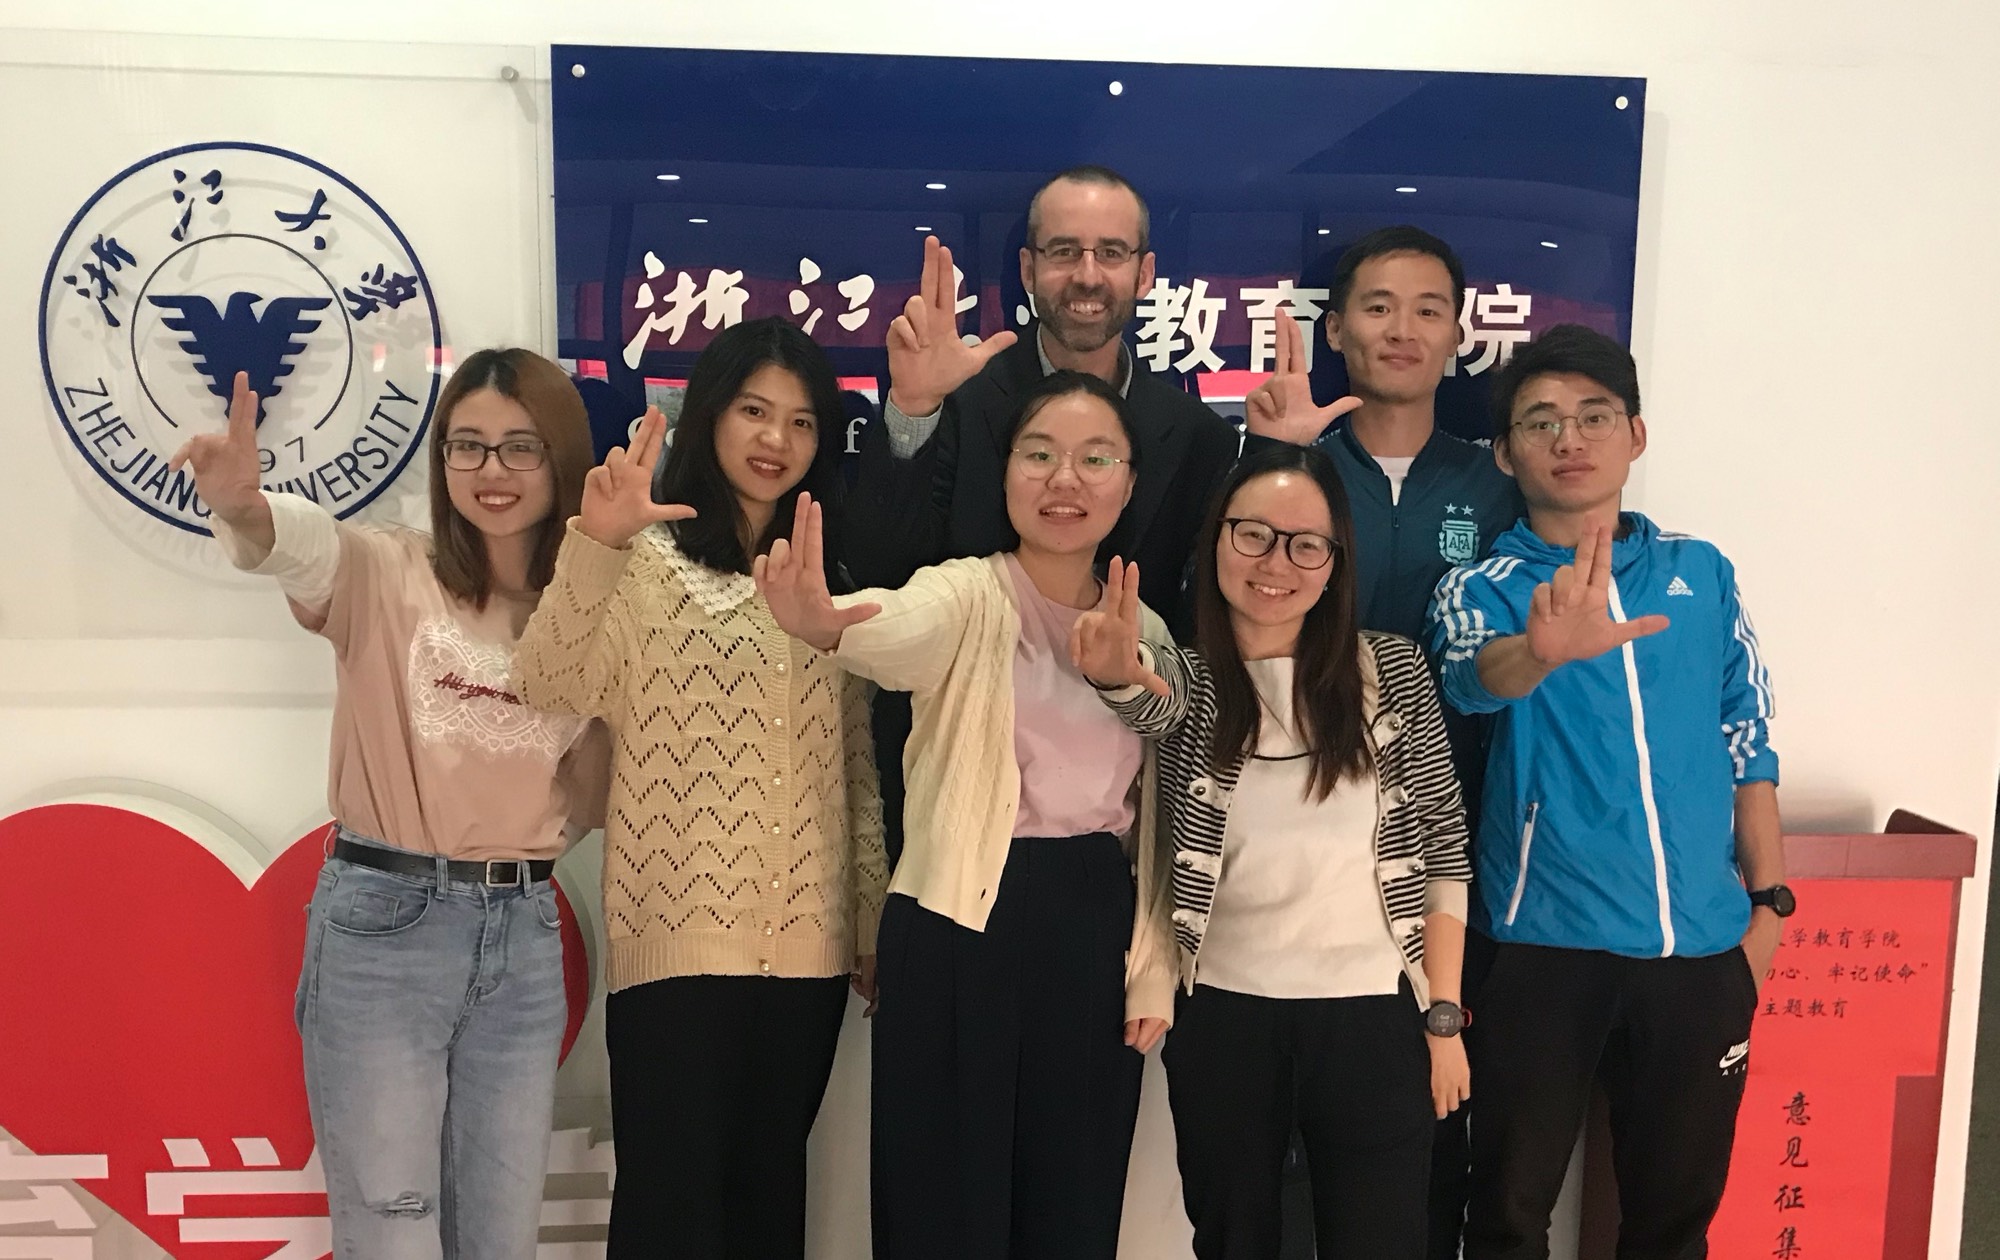 Anchor Up from Dr. Coles and Sport Management students at Zhejiang University in China!